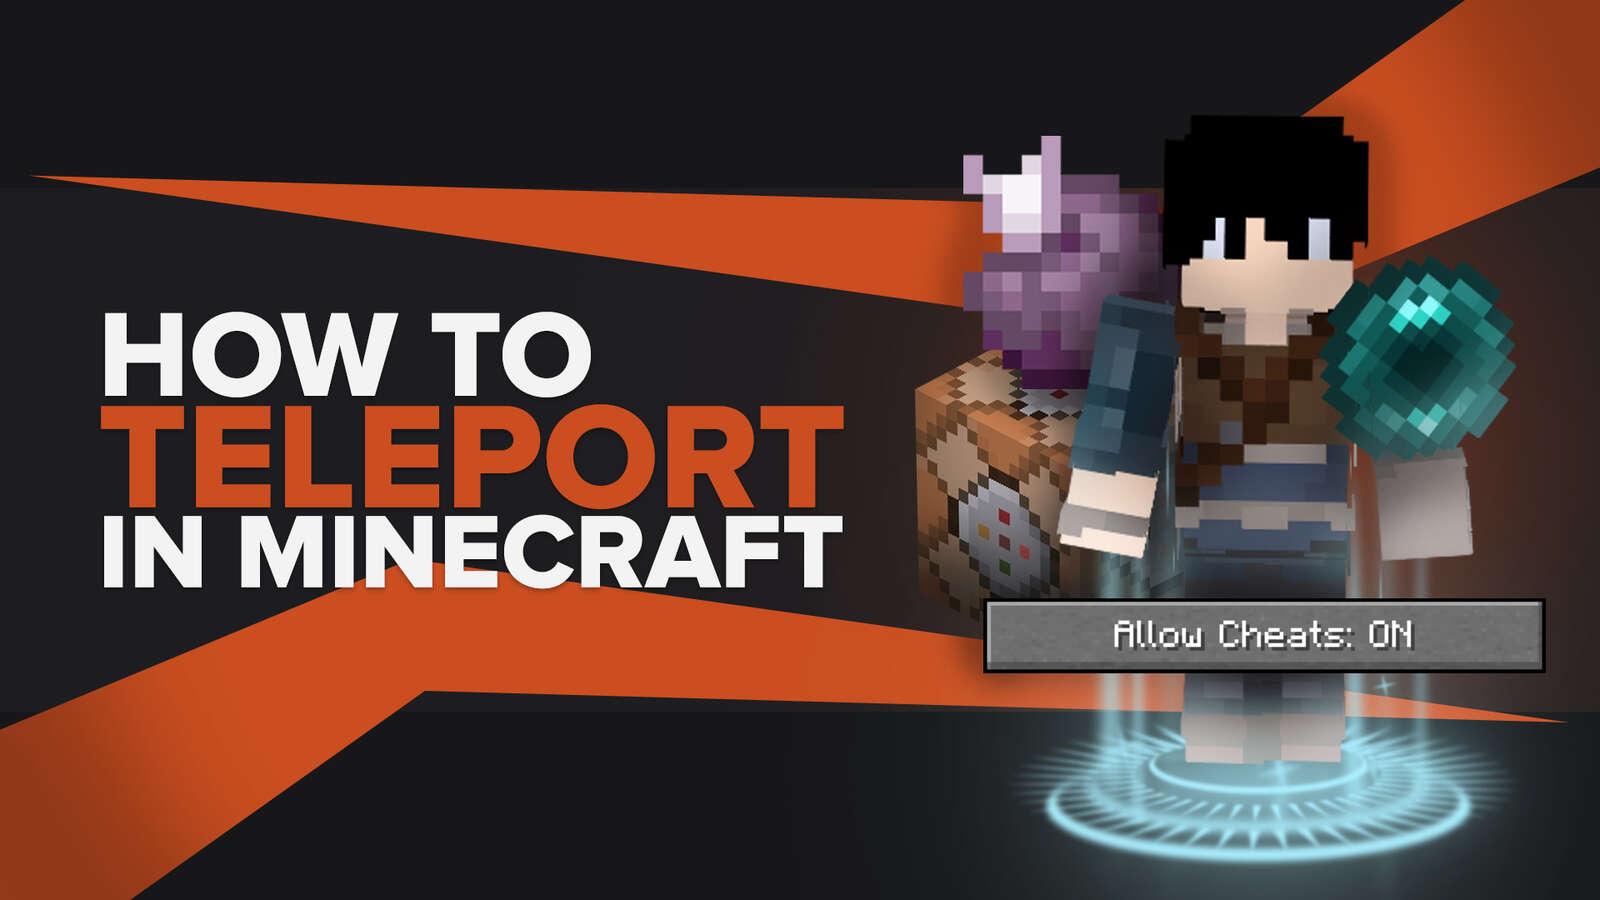 How To Teleport in Minecraft